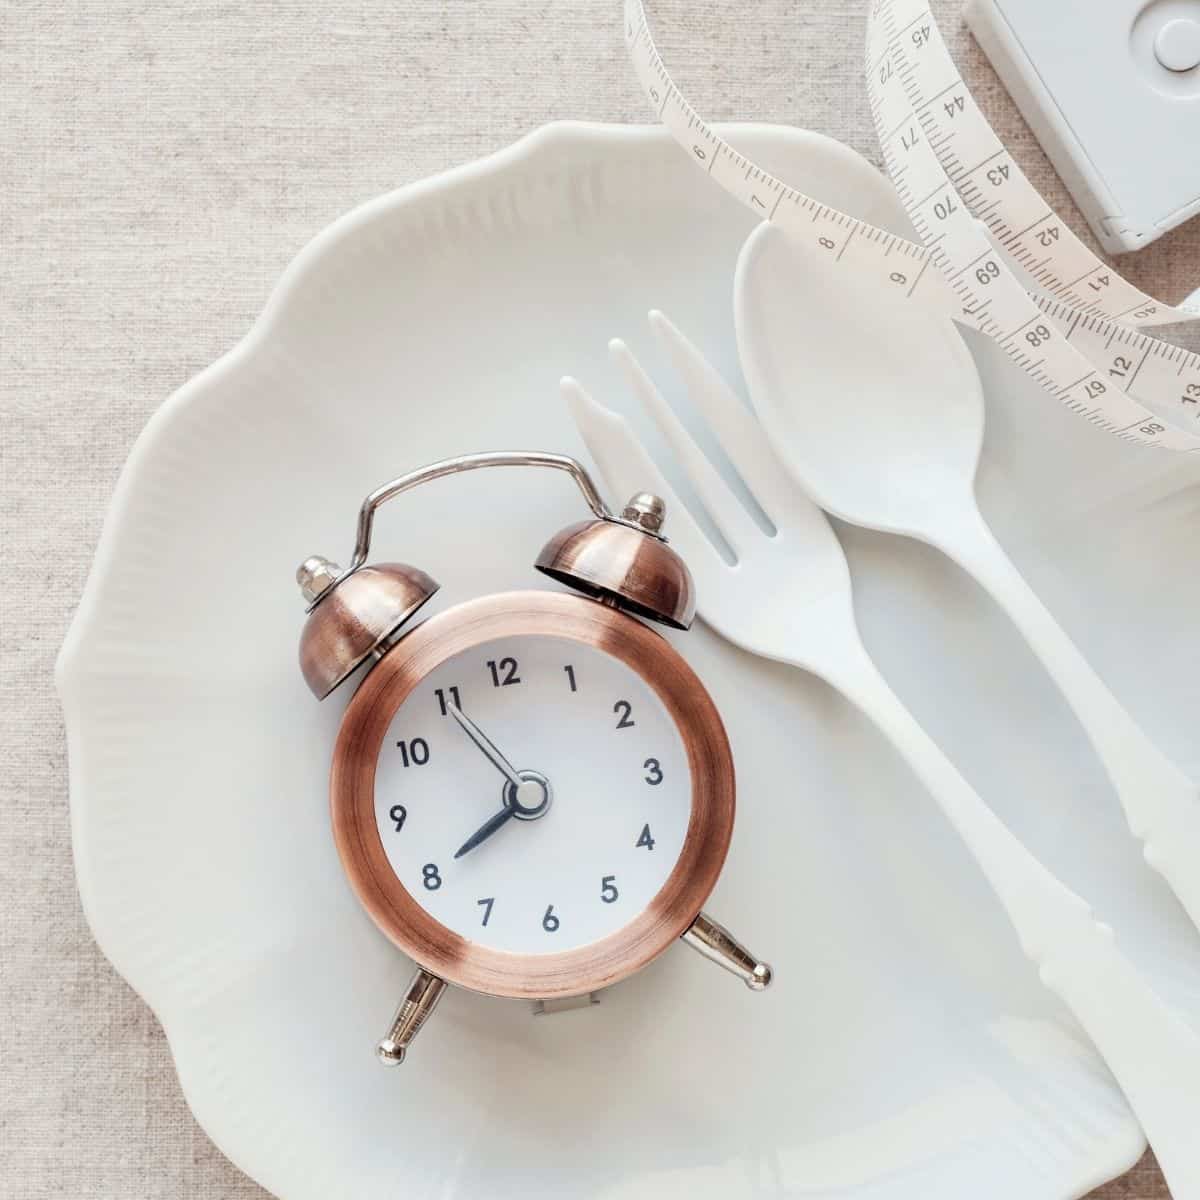 Clock on white plate with fork and spoon. 